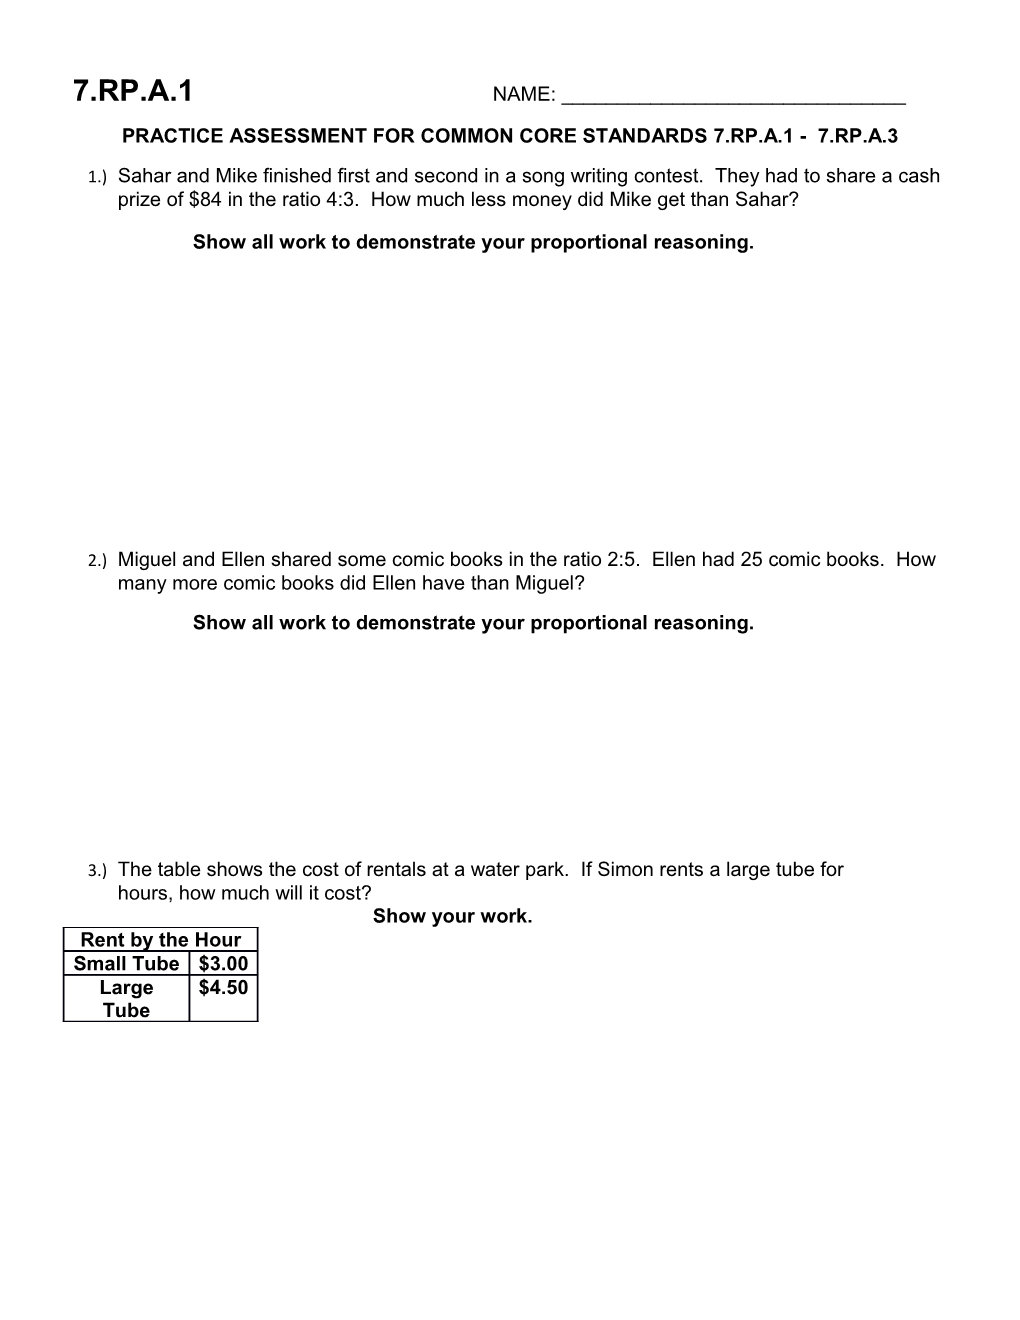 Practice Assessment for Common Core Standards 7.Rp.A.1 - 7.Rp.A.3